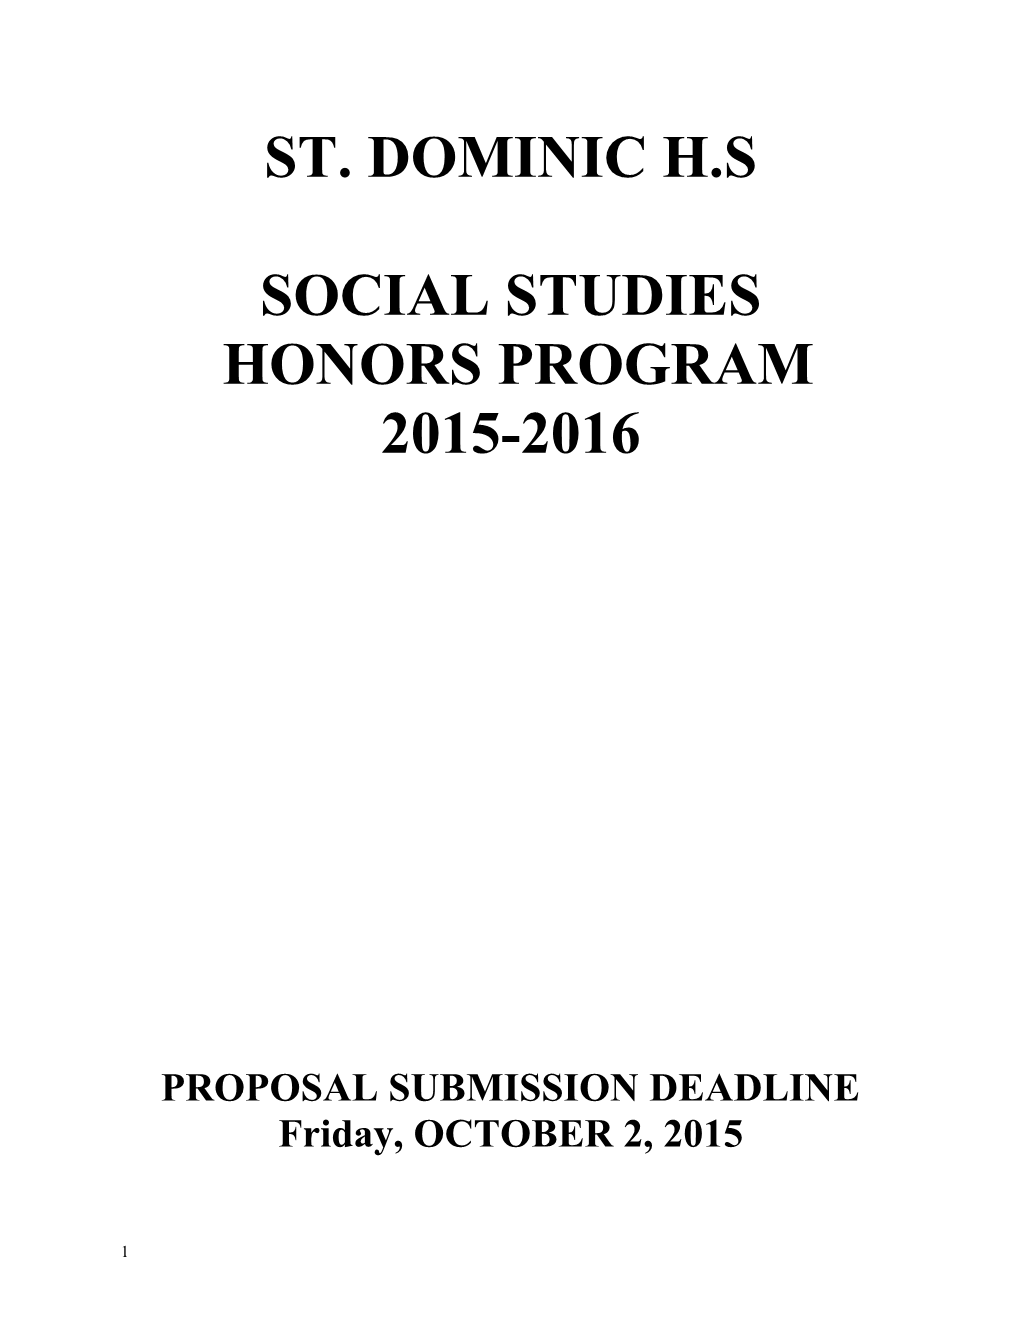 Proposal Submission Deadline